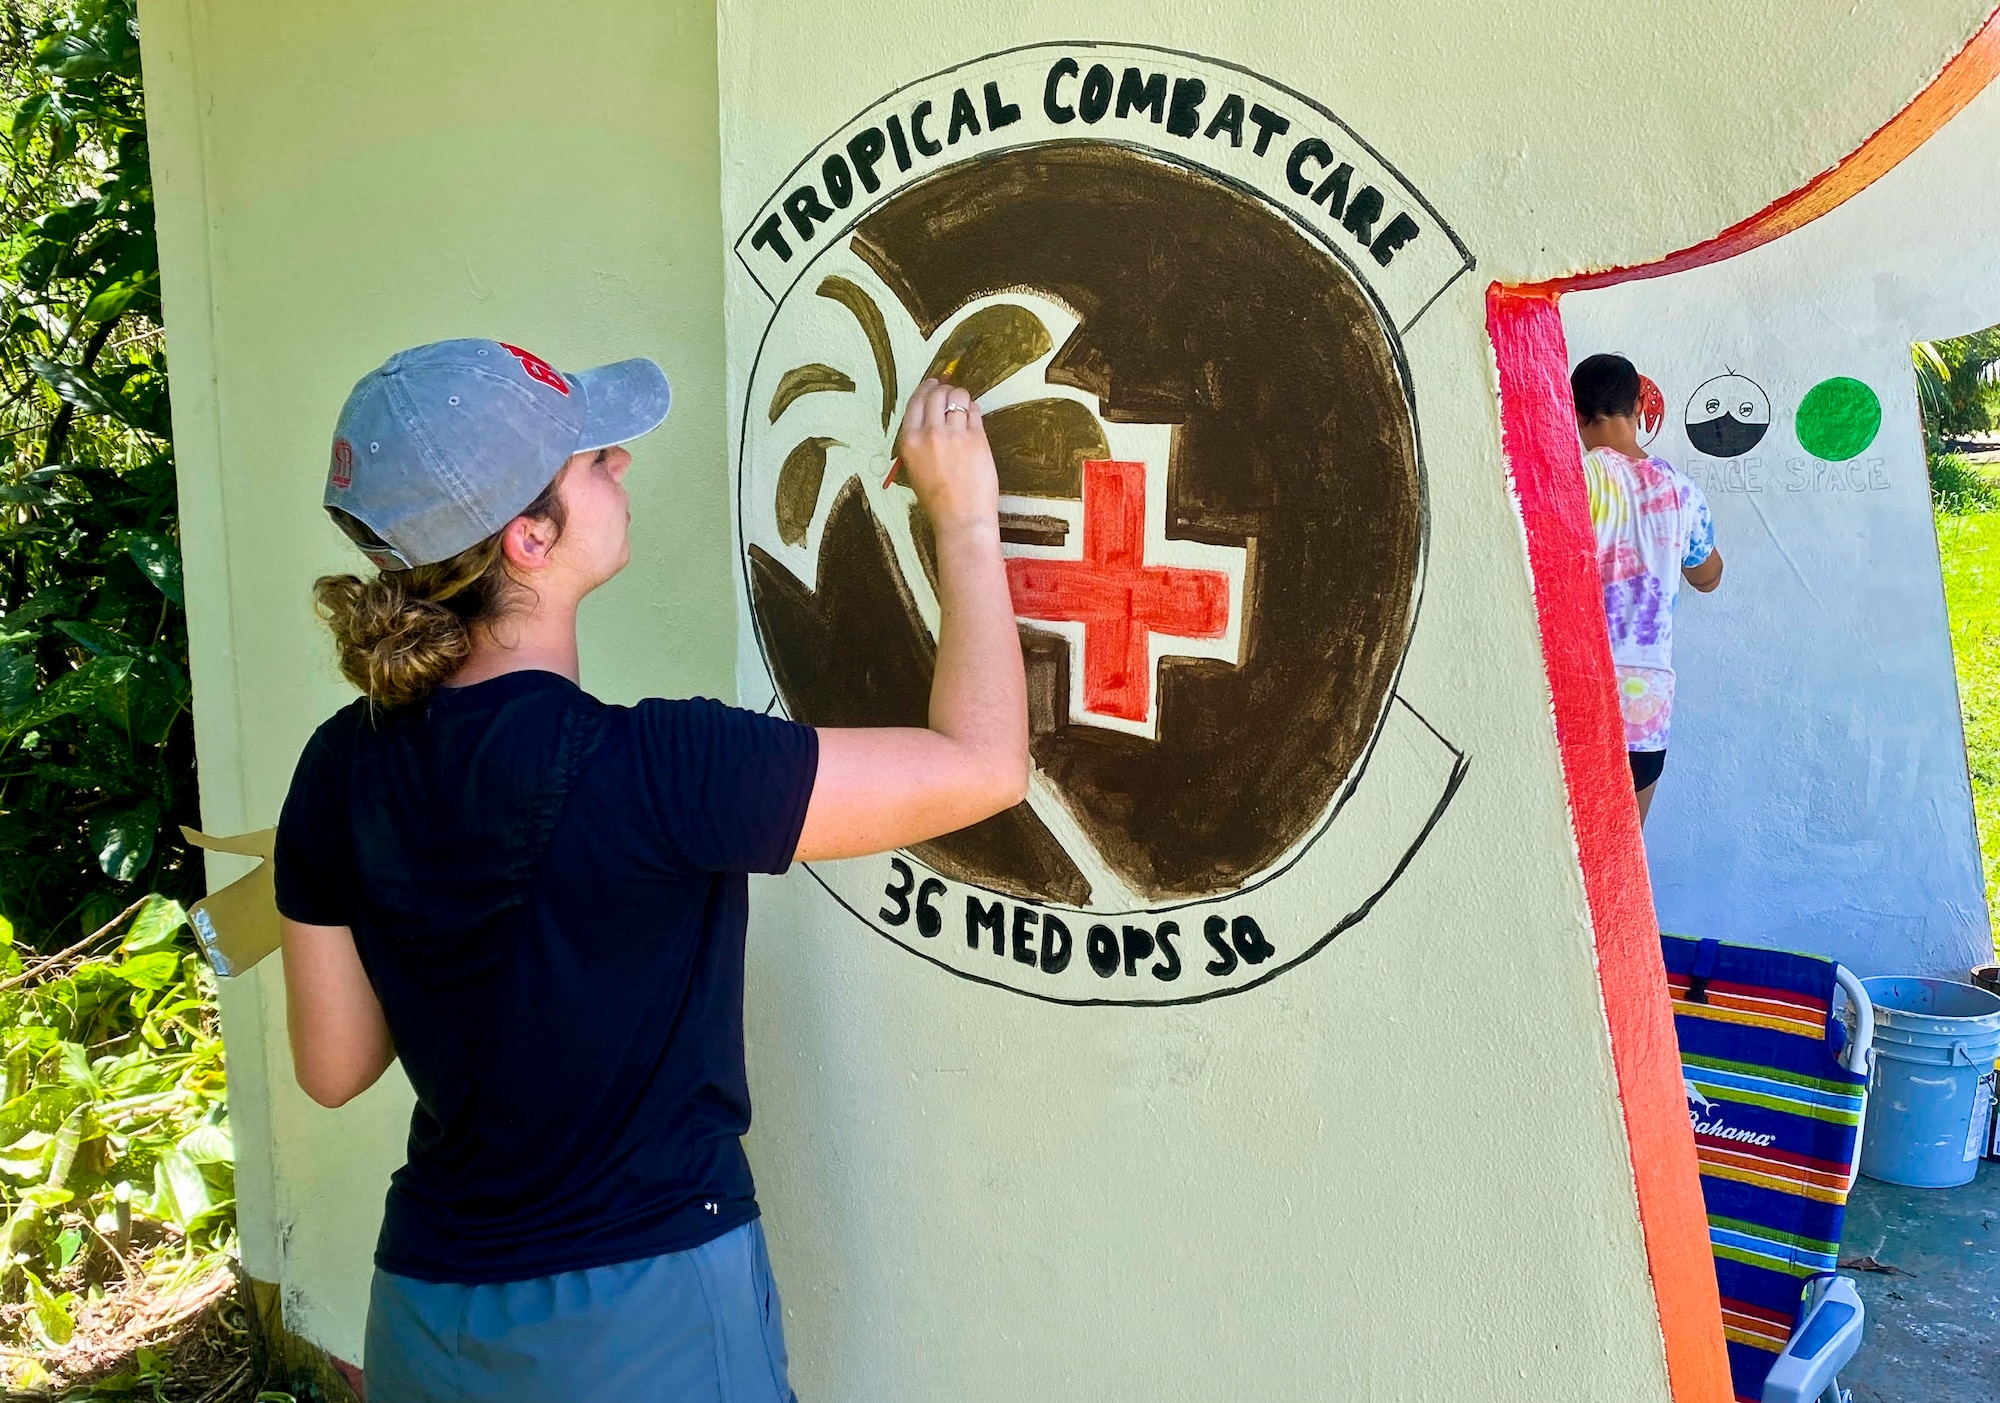 U.S. Air Force Airman 1st Class Brandie Bleess, 36th Healthcare Operations Squadron family health technician, paints a bus stop in Agat, Guam, April 17, 2021. Nearly a dozen 36th HCOS Airmen and family members joined Agat Mayor’s Office staff to repaint two village bus stops through the Andersen Air Force Base Sister Village Sister Squadron program, in which squadron volunteers collaborate in events with Guam residents to strengthen their friendship and partnership. (Photo courtesy of Tech. Sgt. Brittany Wallace)